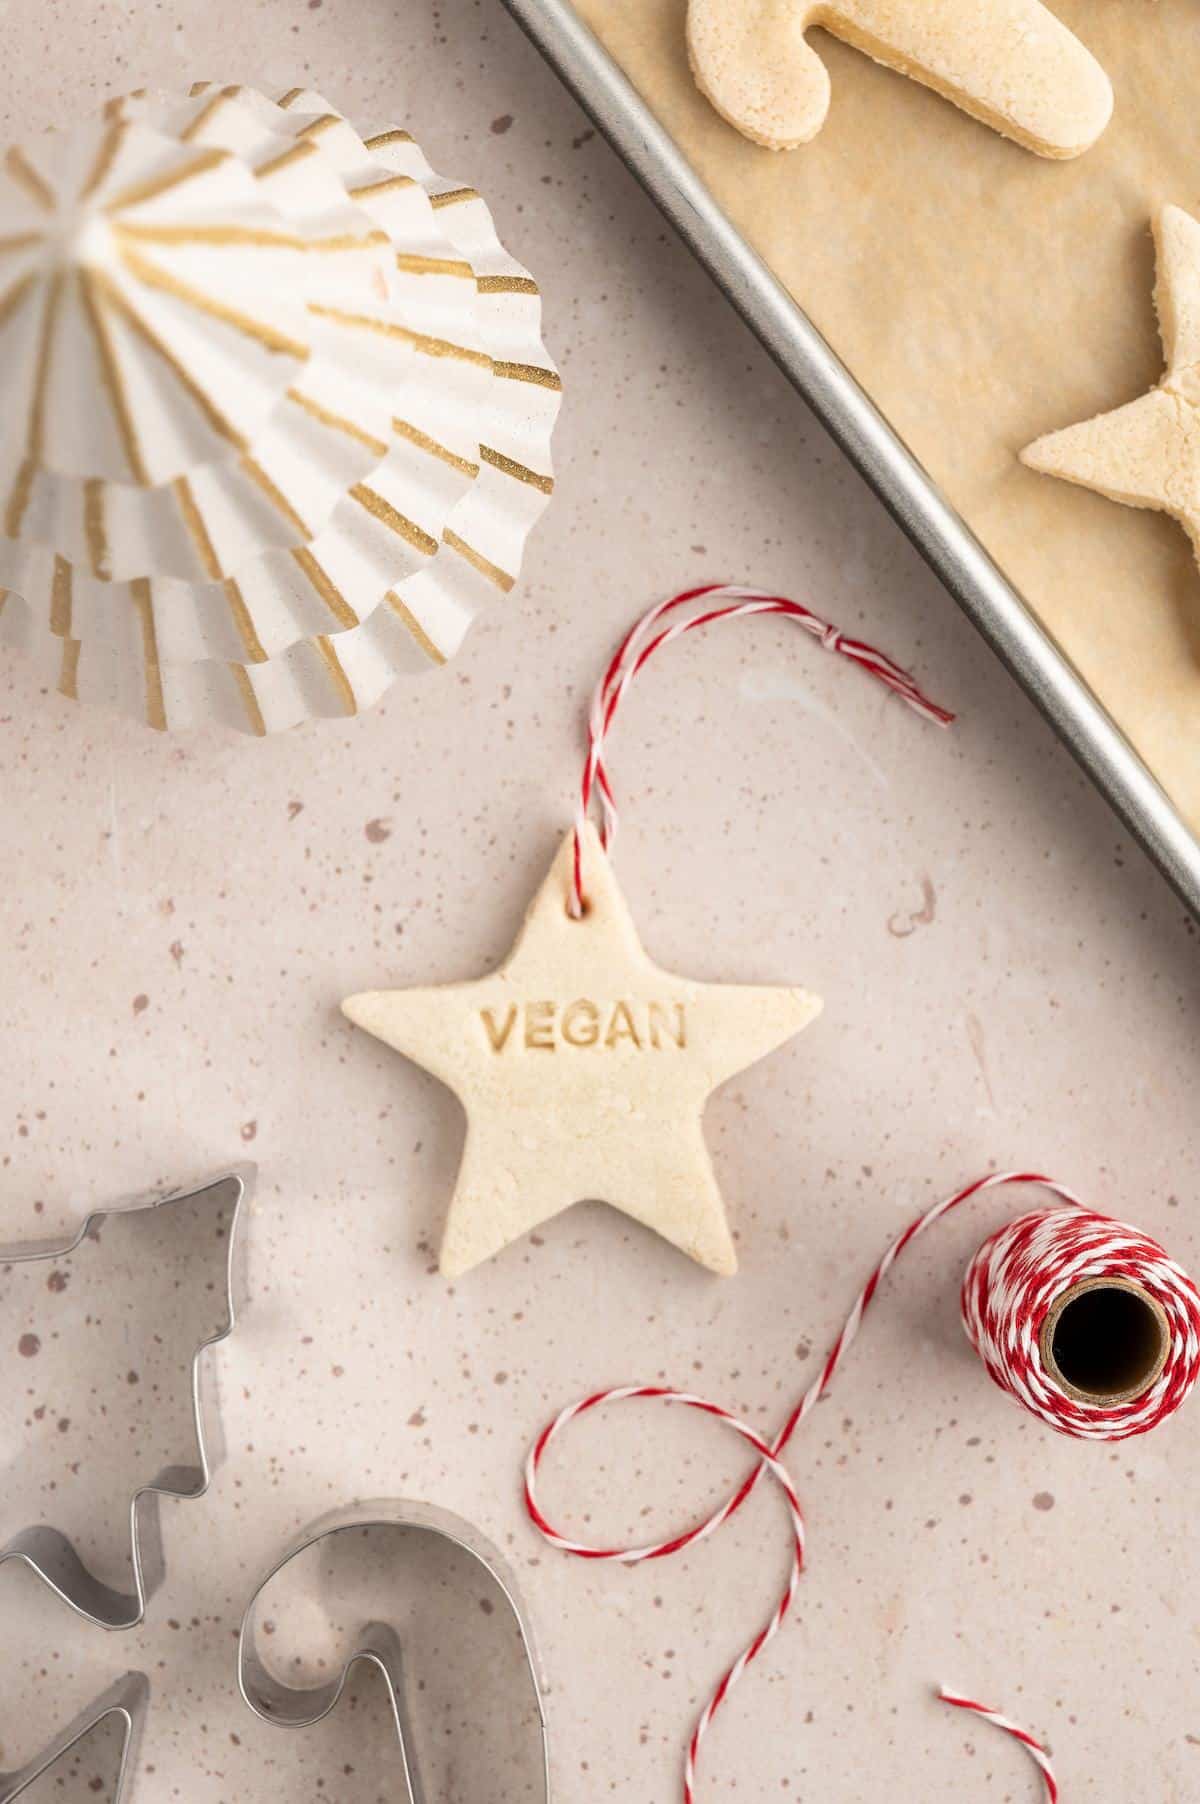 Salt dough ornament with the word "vegan" stamped on it.